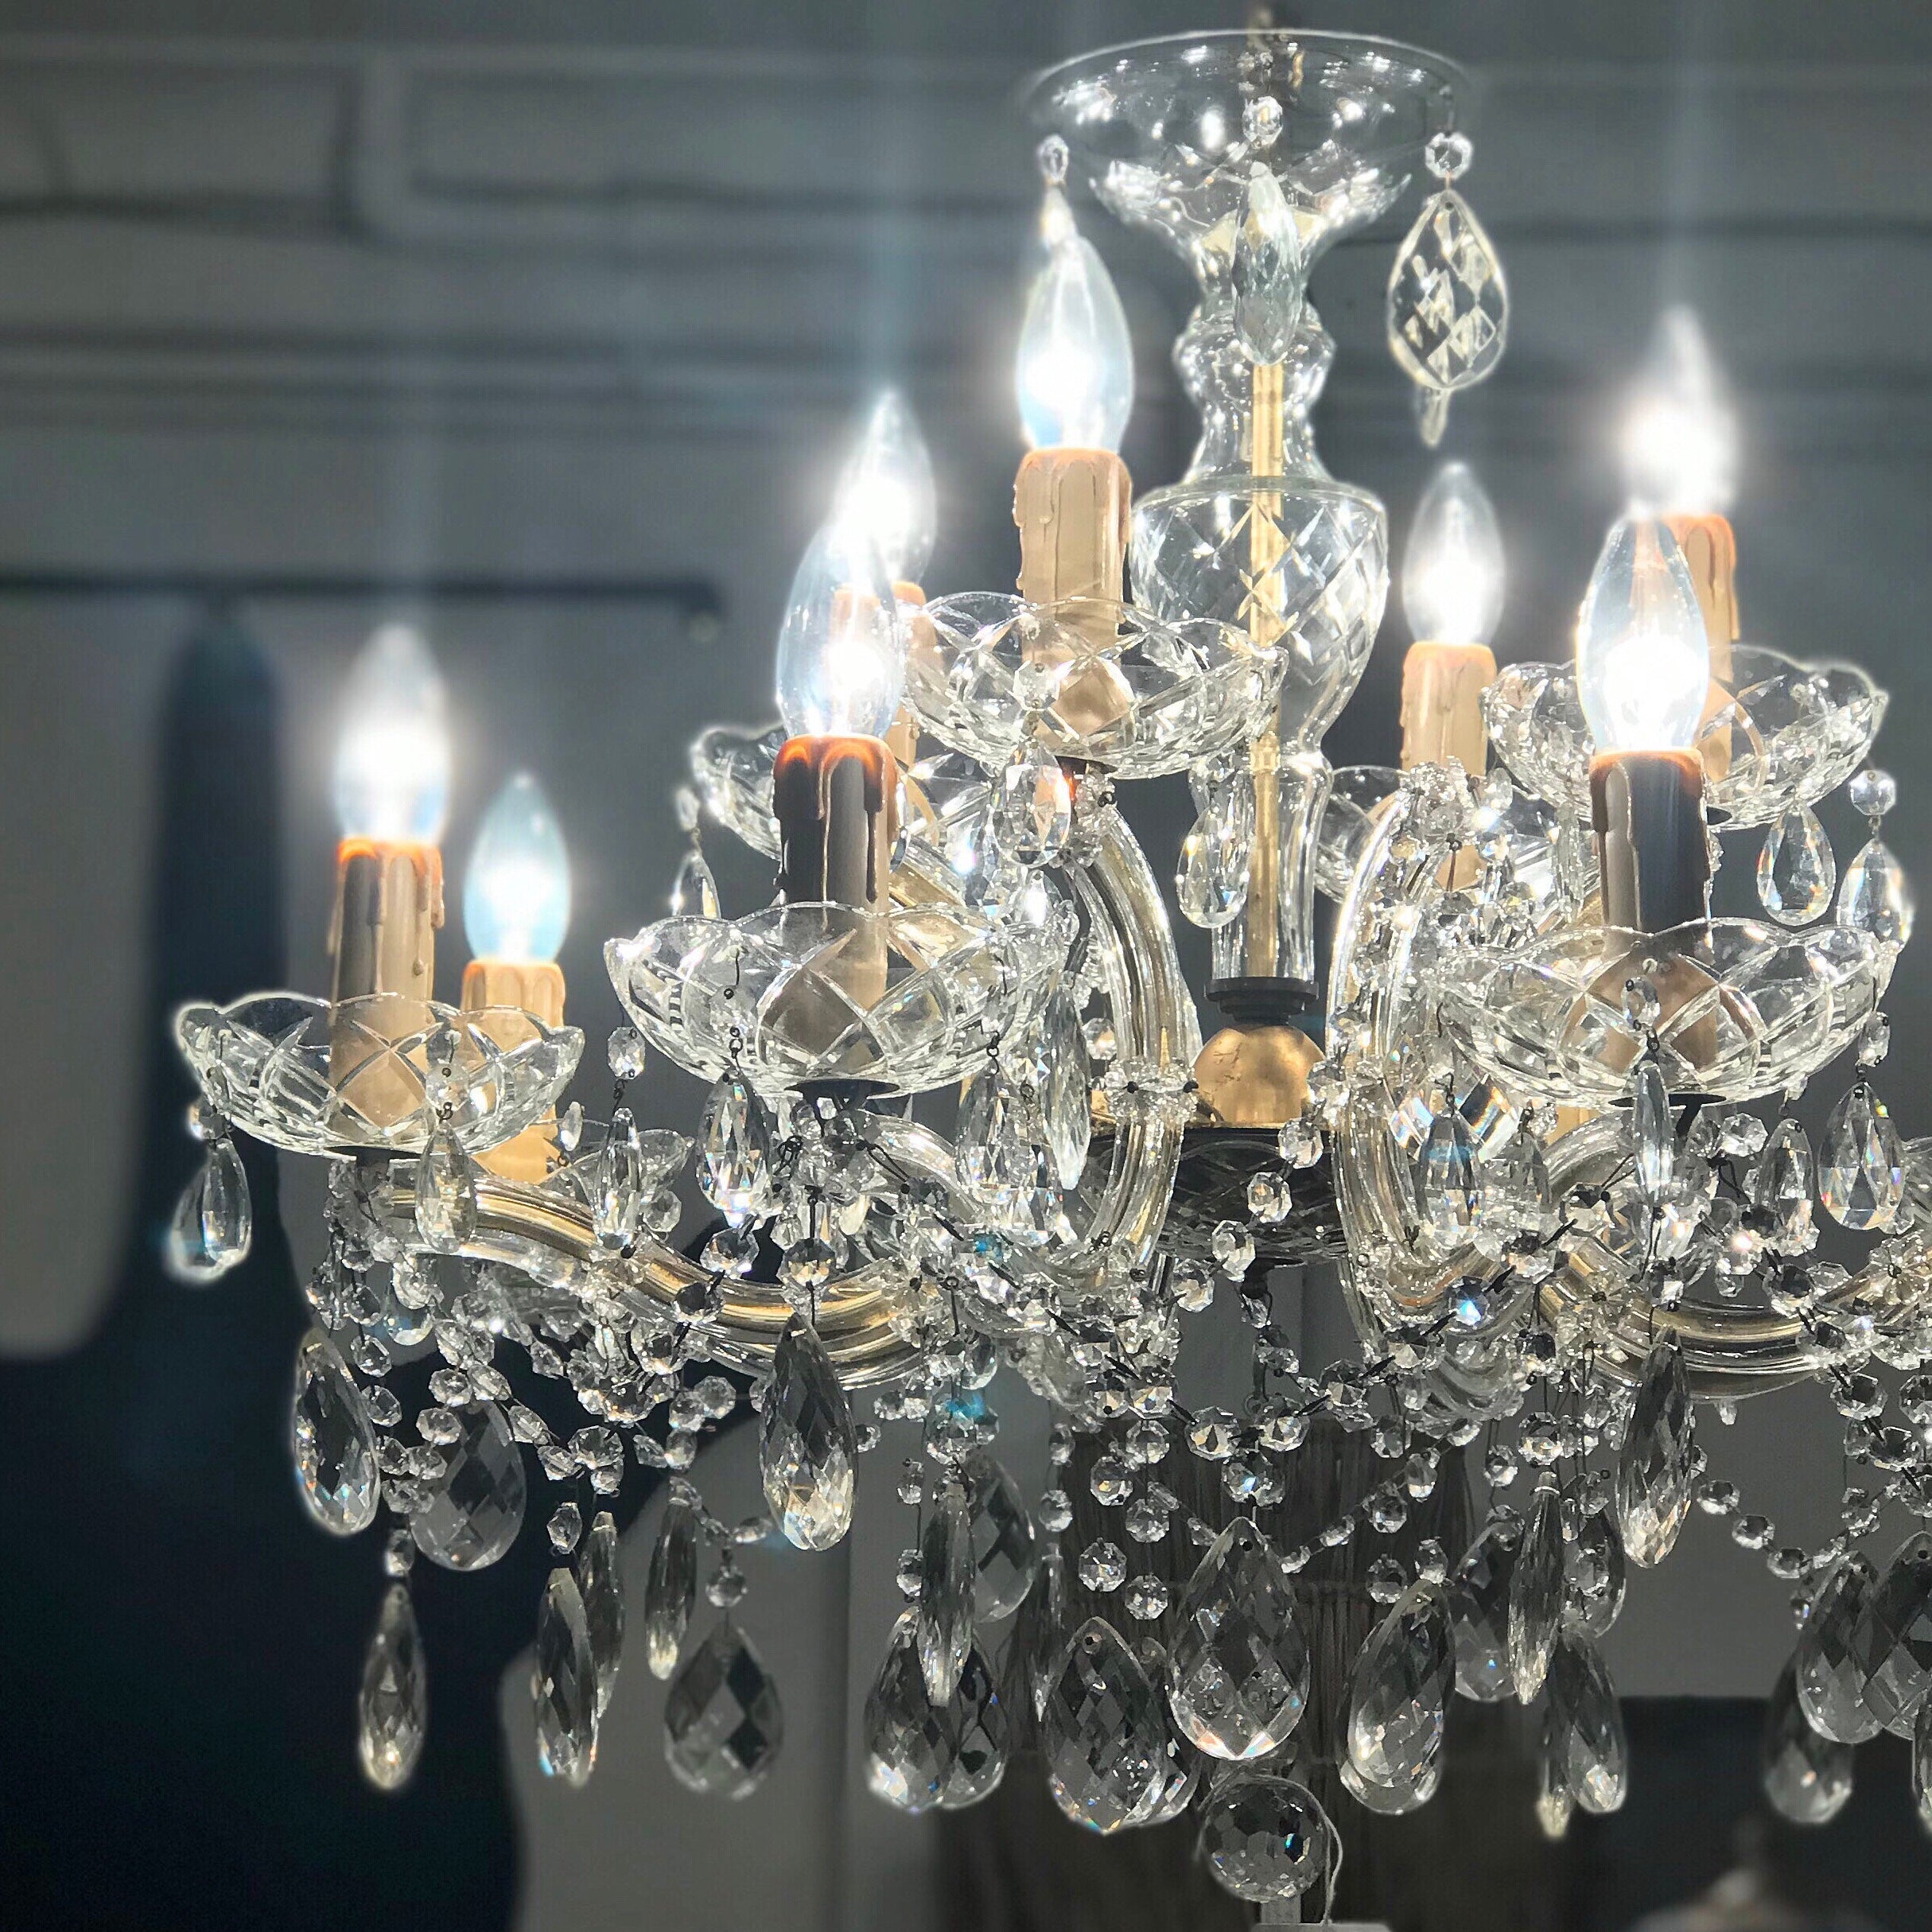 Vintage French & Italian Cut Glass & Crystal Chandeliers